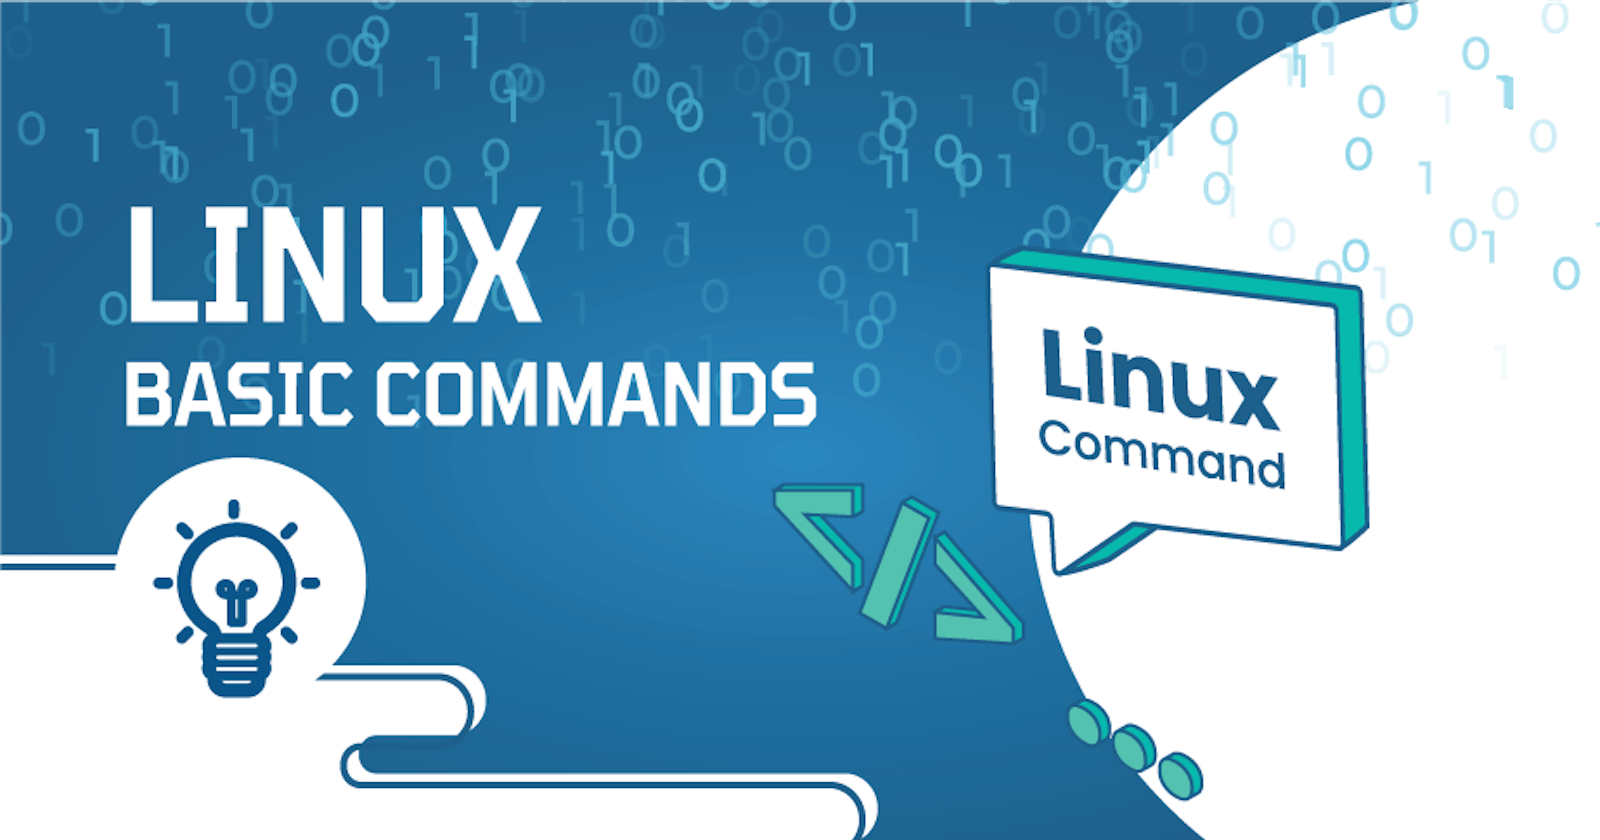 Day 3 - Basic Commands of Linux